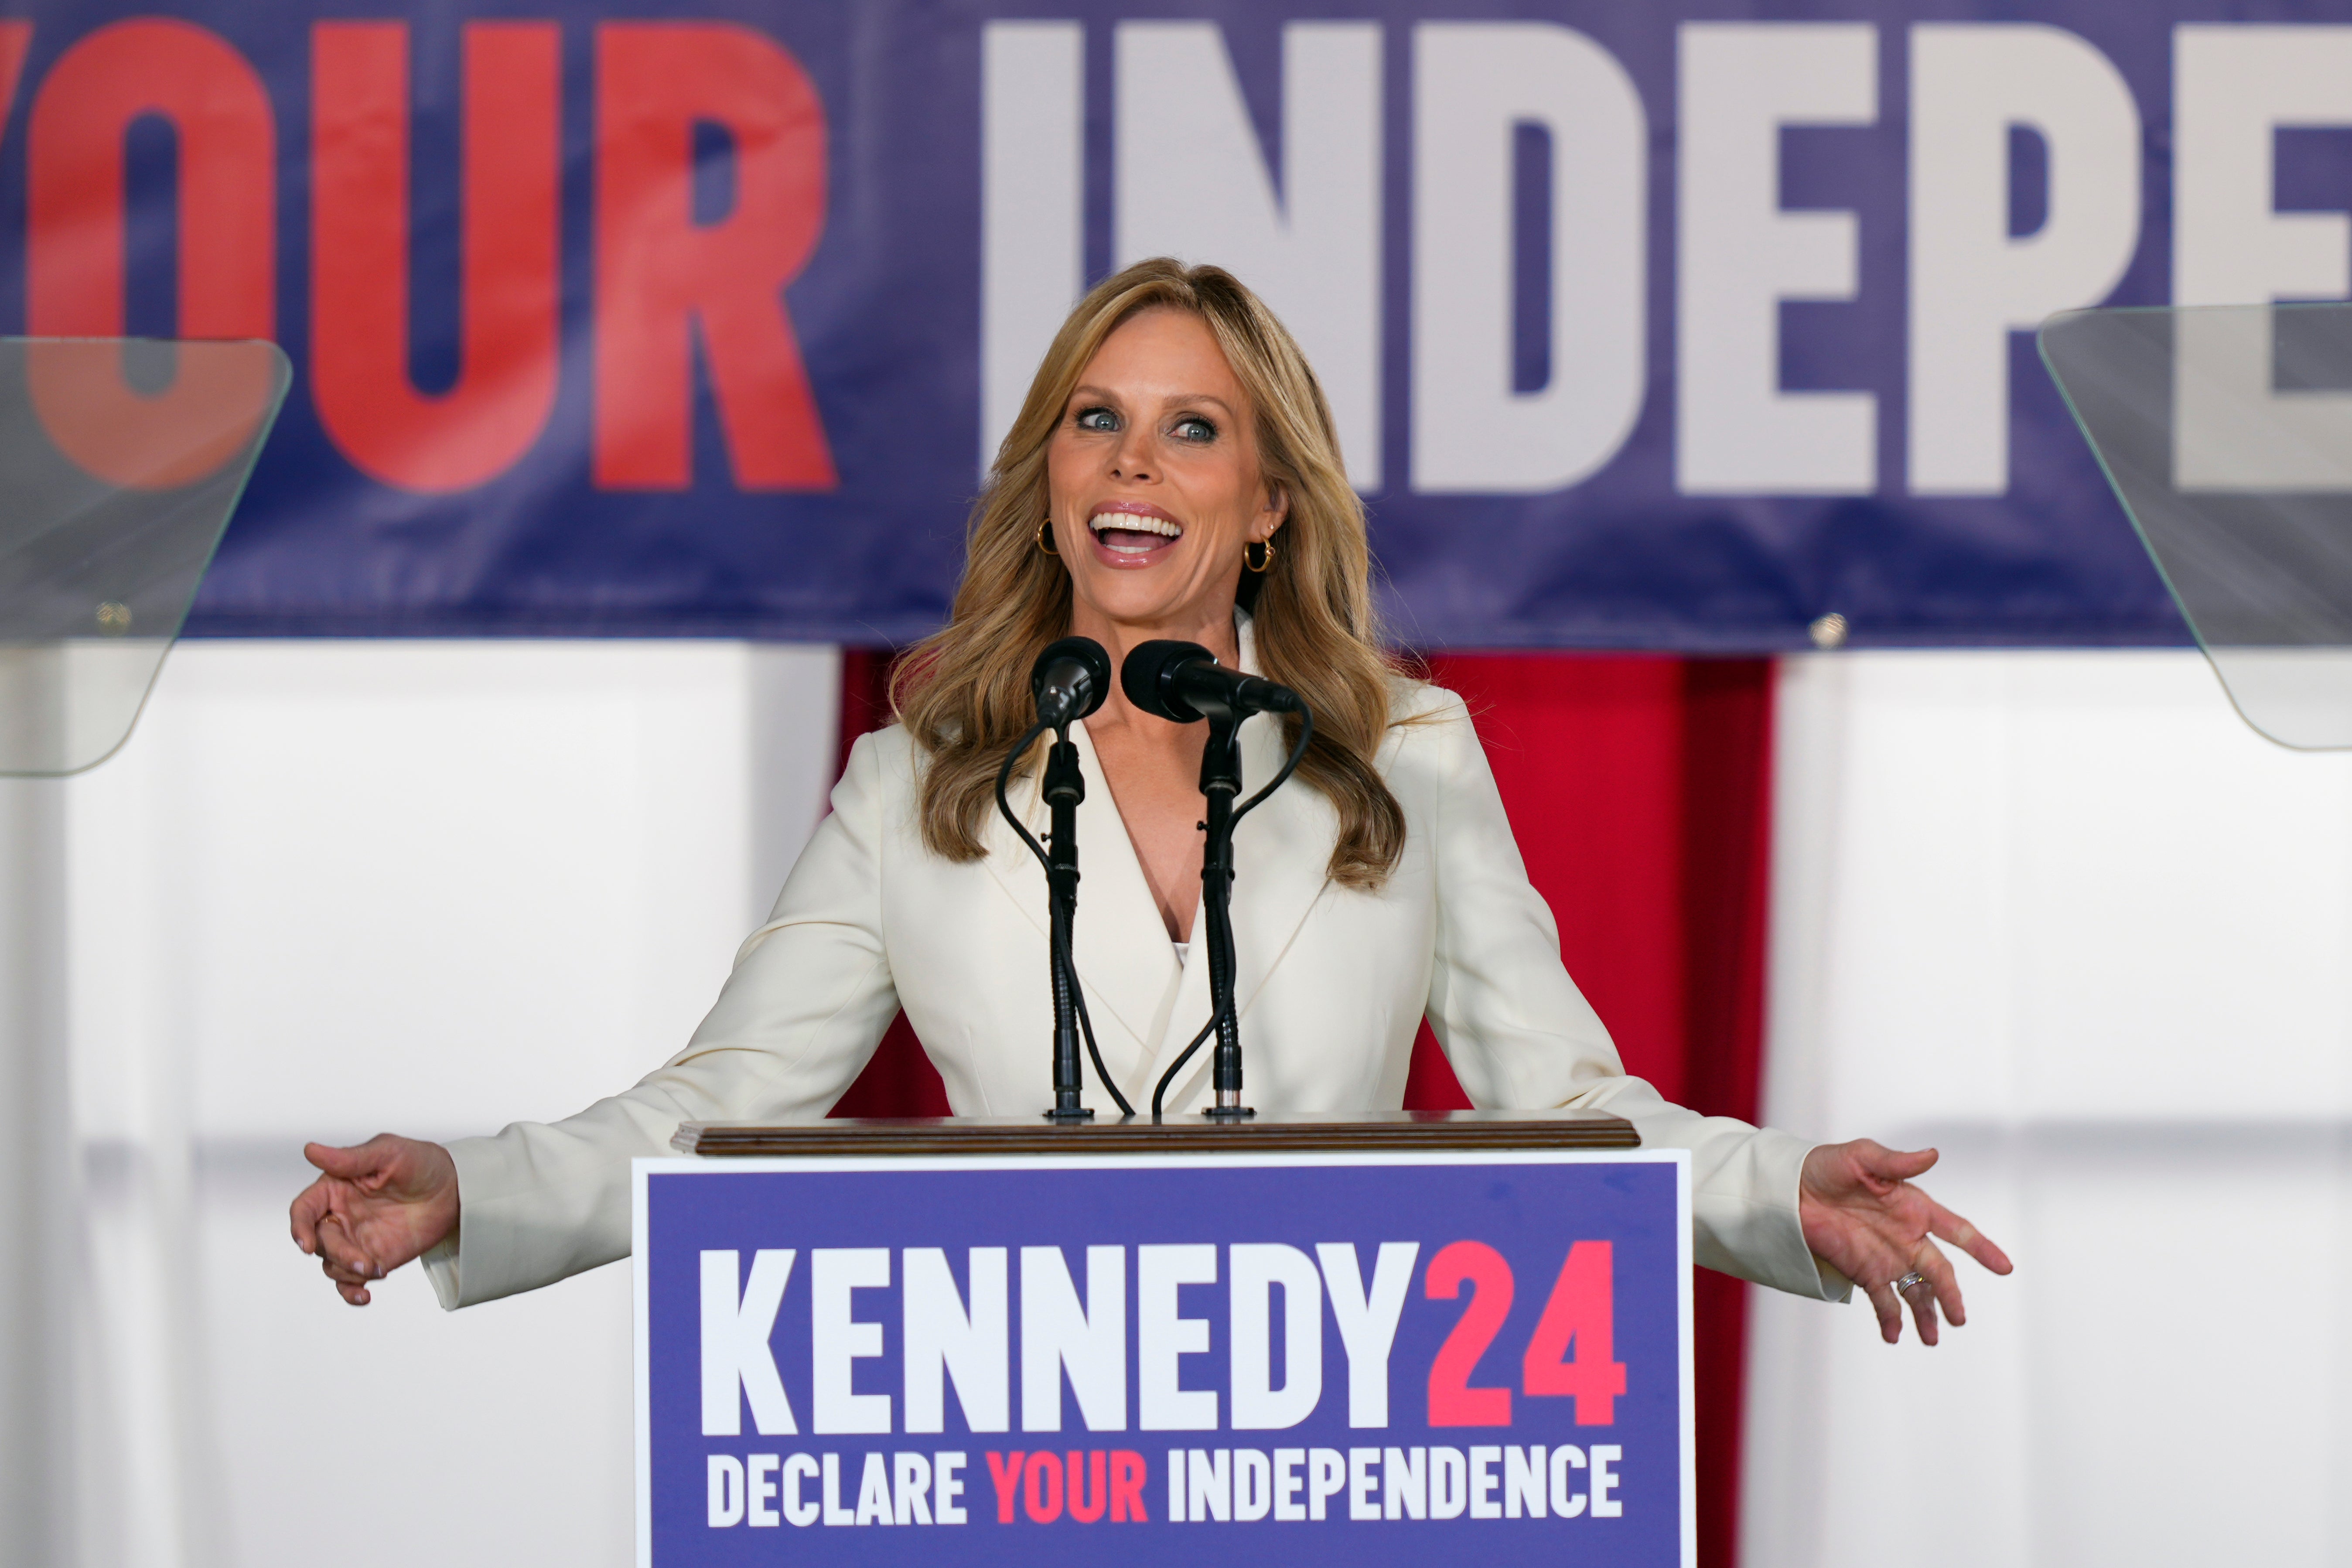 Cheryl Hines, wife of Presidential candidate Robert F. Kennedy, Jr. speaks during a campaign event for him at Independence Mall, Monday, Oct. 9, 2023, in Philadelphia.